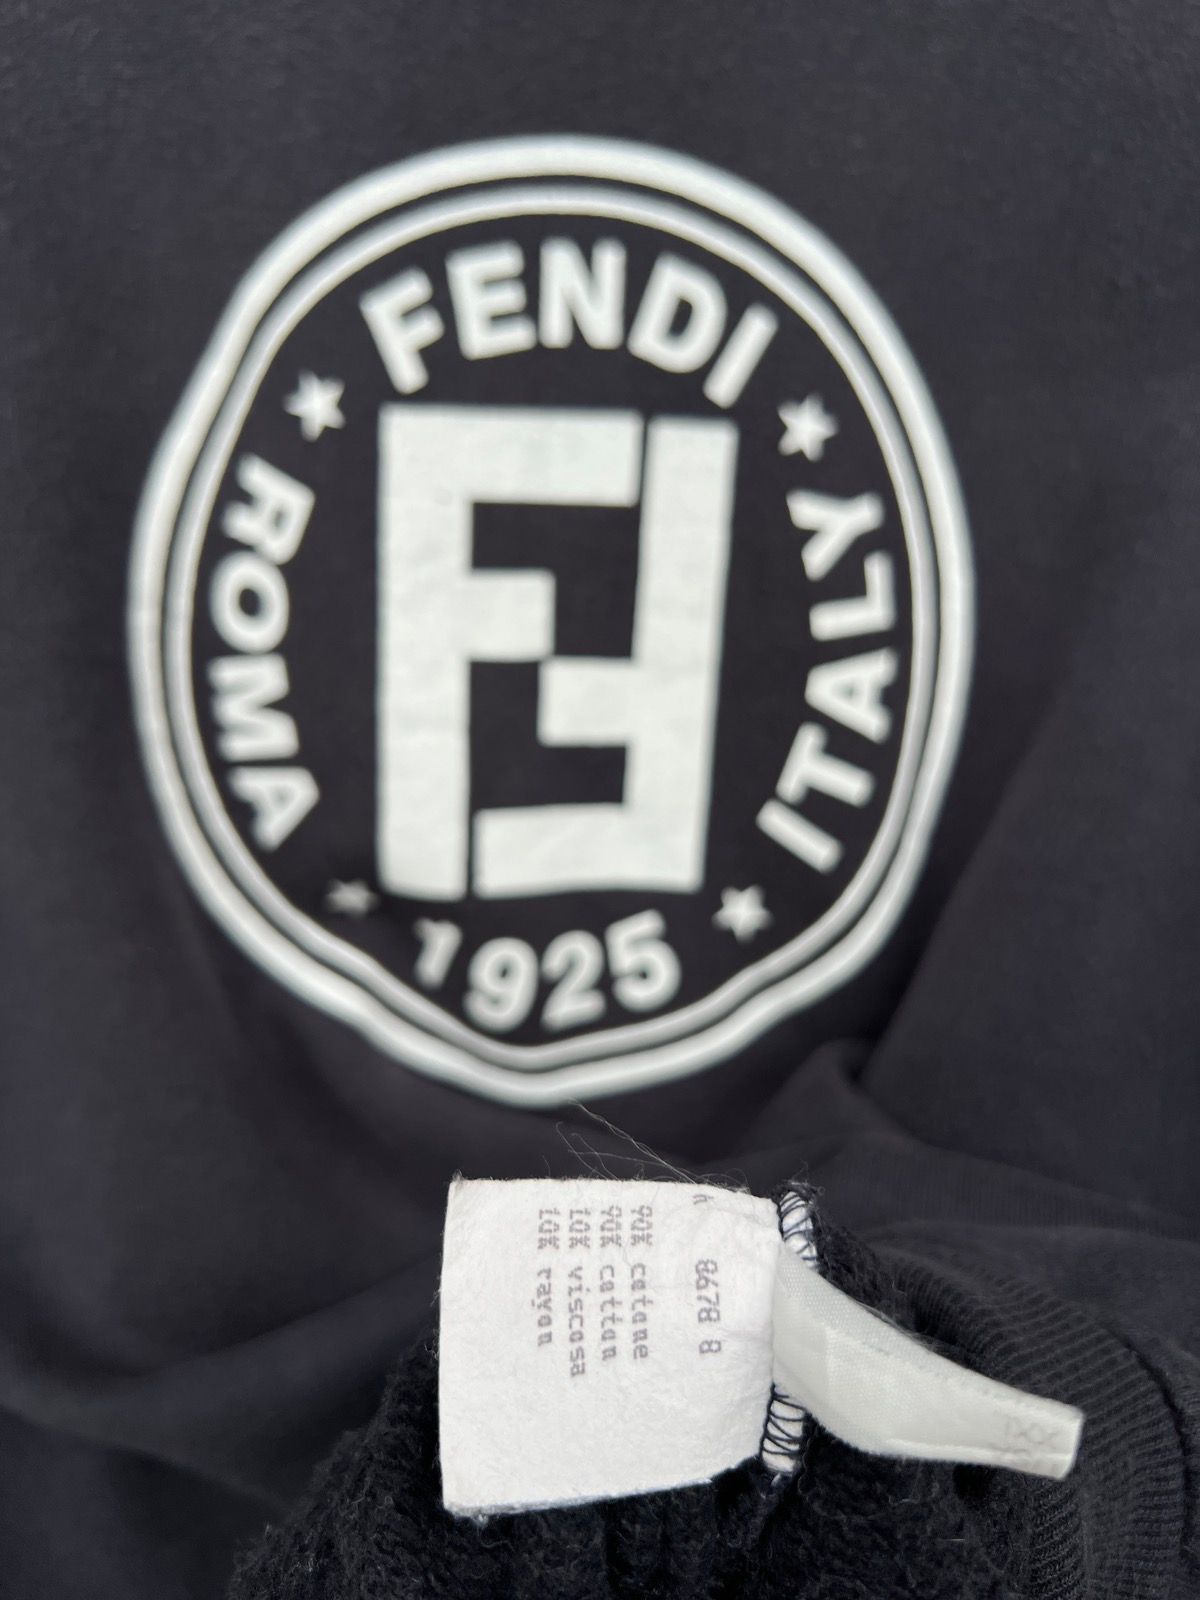 Vintage 90s Fendi Roma Italy Spell Out Baggy Sweatshirt XL - 7